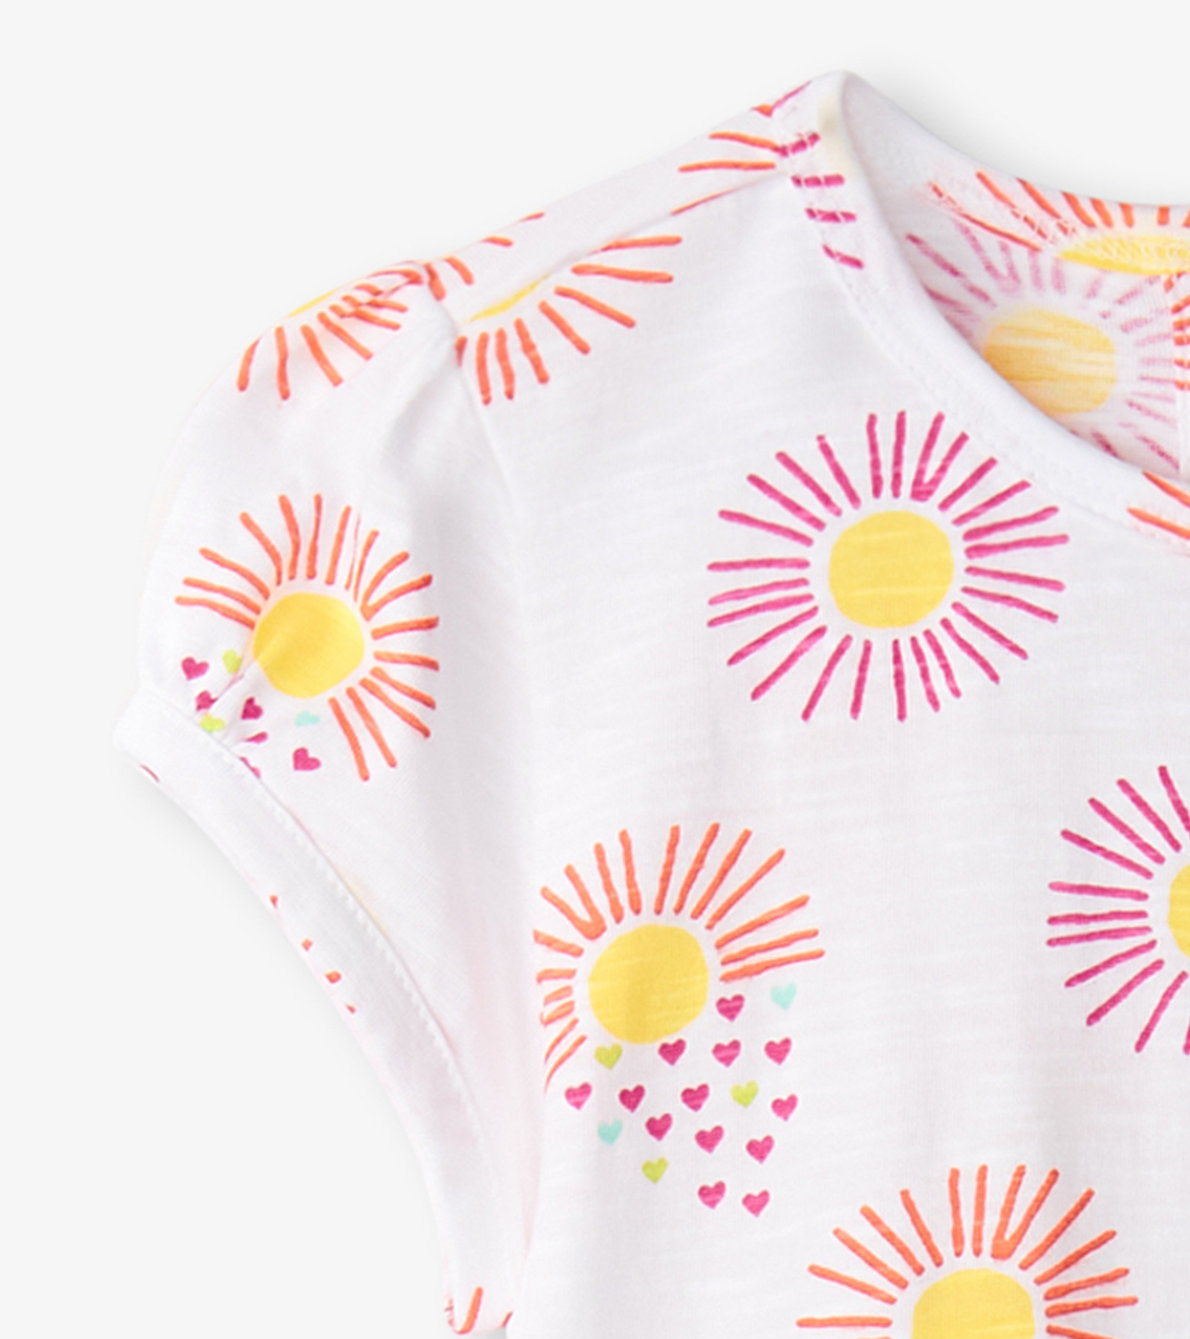 View larger image of Baby & Toddler Girls Heart Suns Gathered Dress